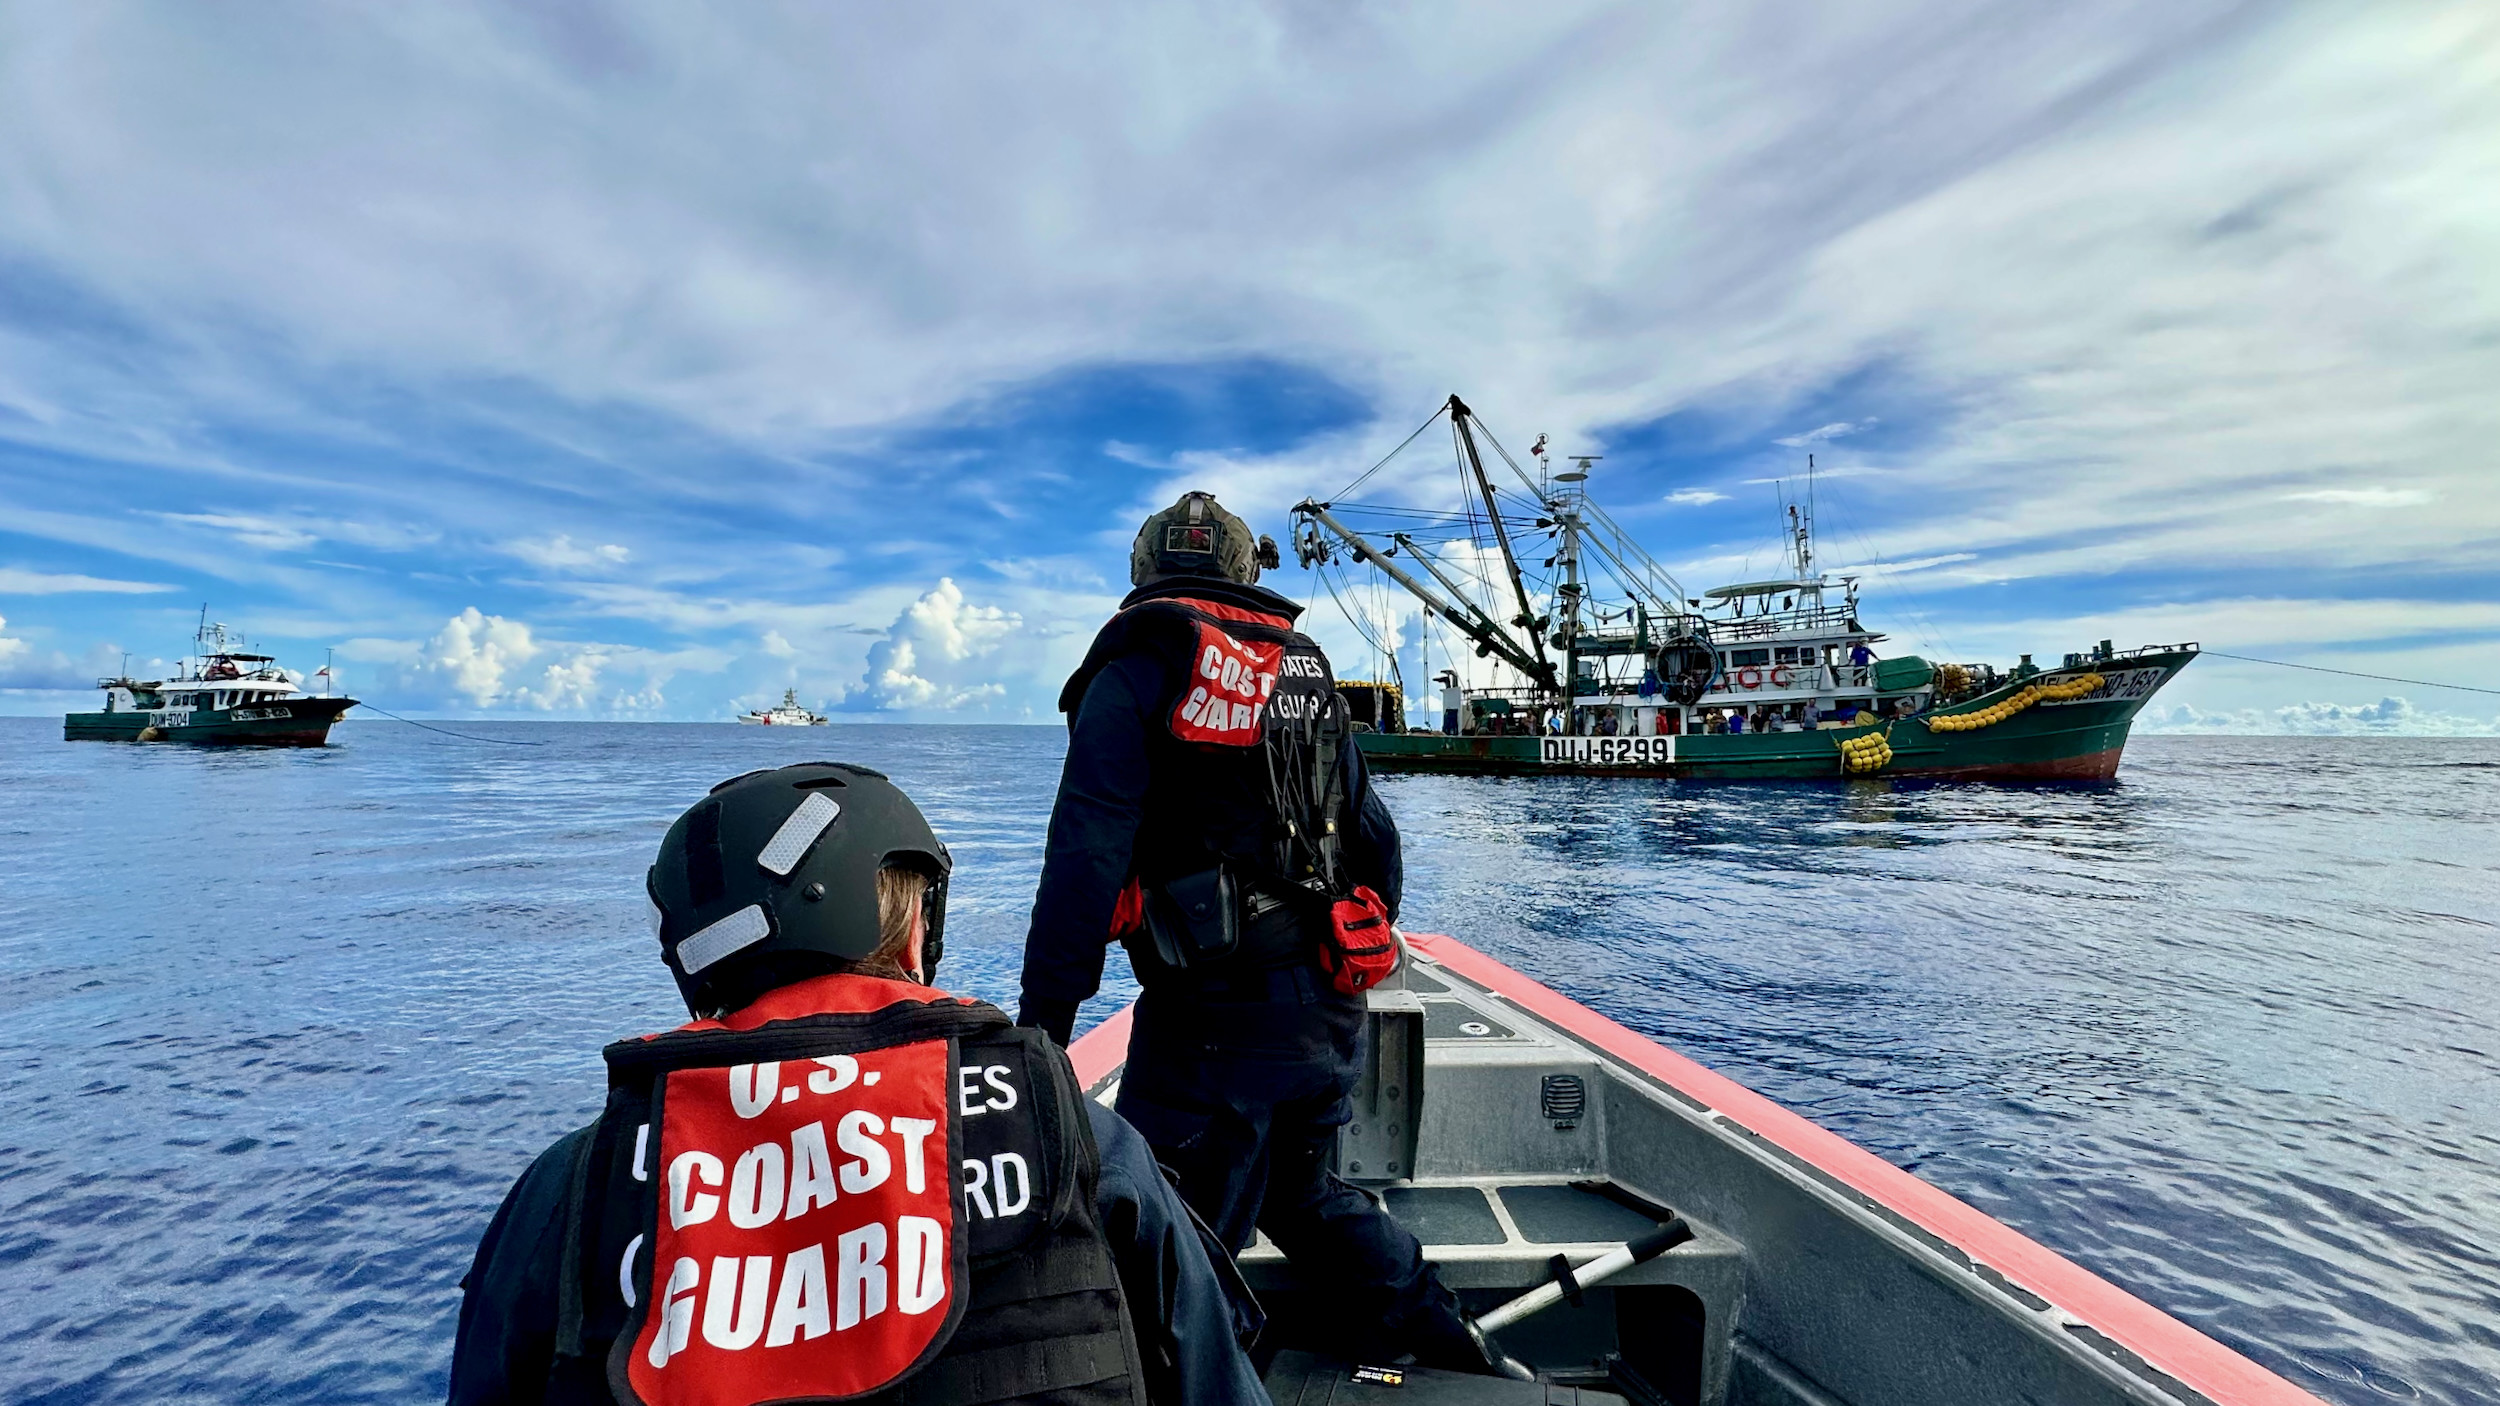 U.S. Coast Guard completes mission to combat illegal fishing in Pacific